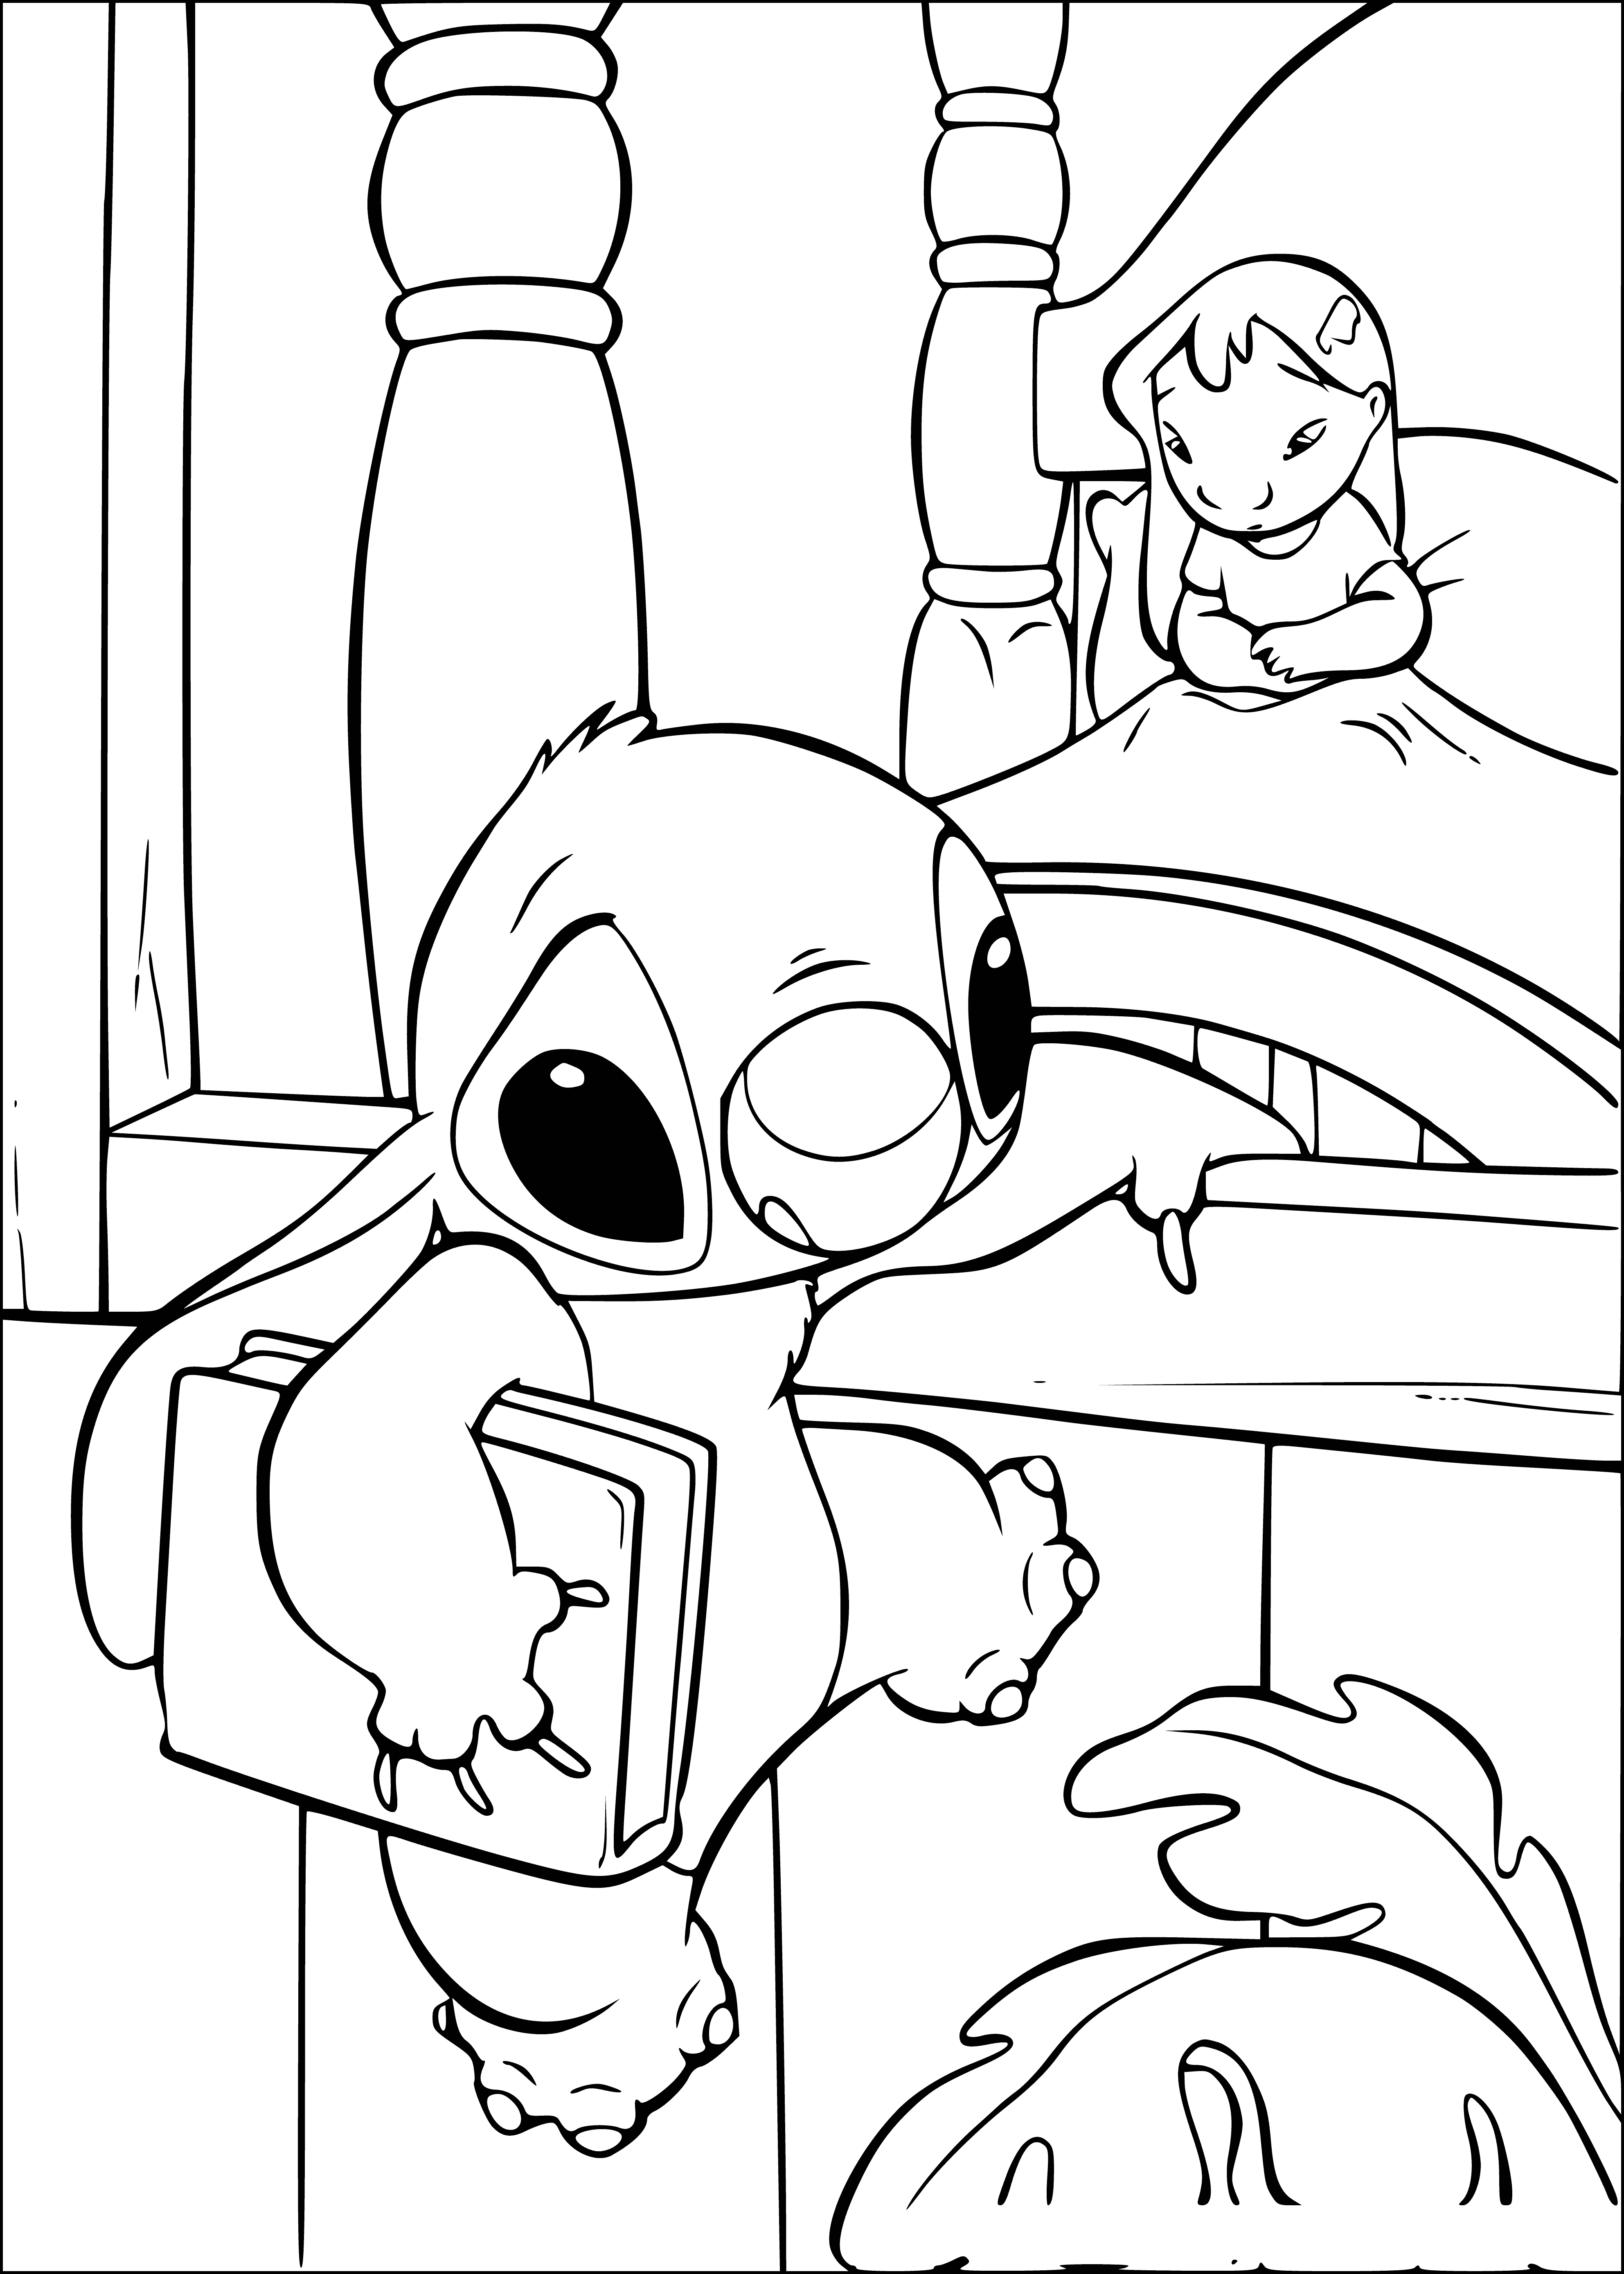 Stitch leaves coloring page